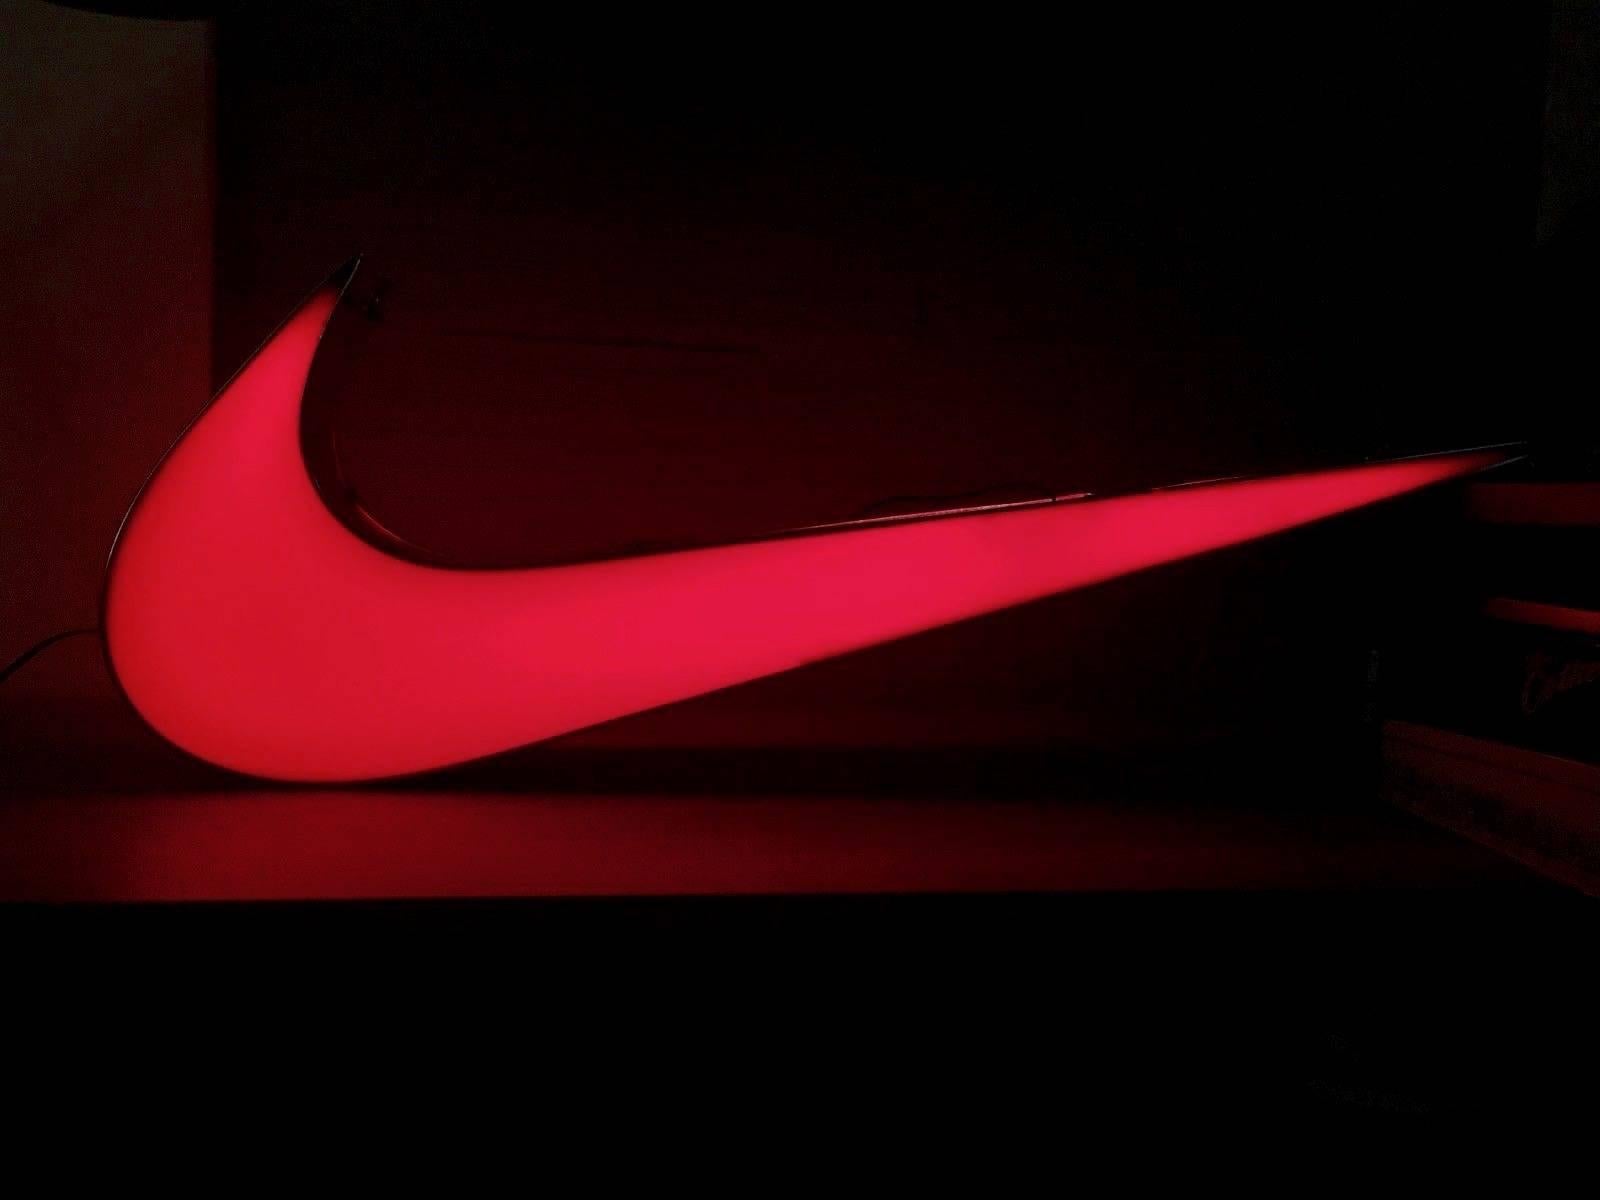 Massive illuminated metal and plastic Nike swoosh. Measures: 3 feet wide. Double sided. Was probably hanging in a Nike Store at some point. Large scale. Excellent condition. One of the most recognizable logos on earth. Super unique.